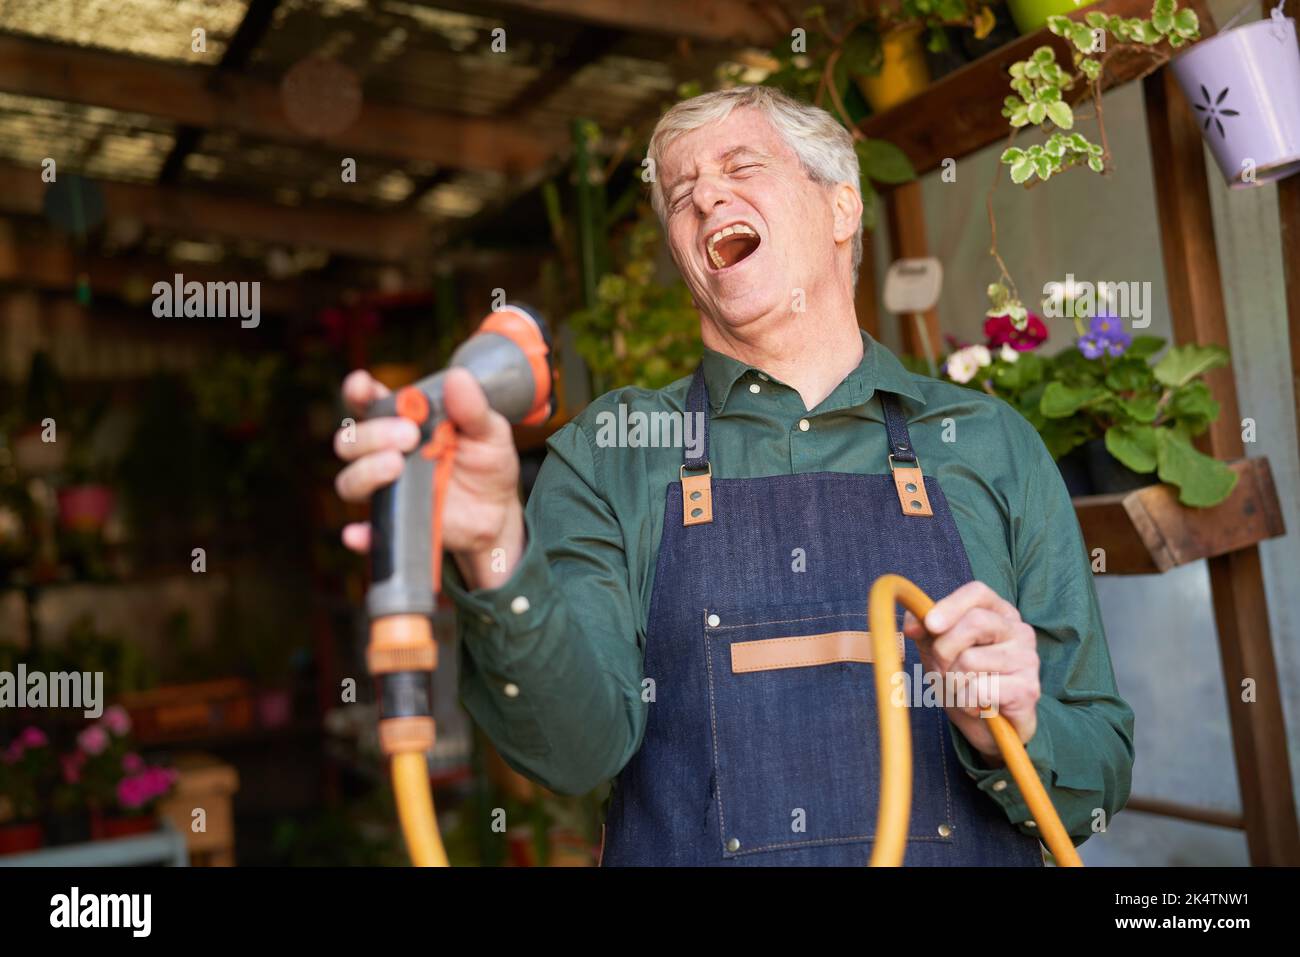 Elderly gardener in the flower shop with a garden hose while singing out loud for fun and high spirits Stock Photo